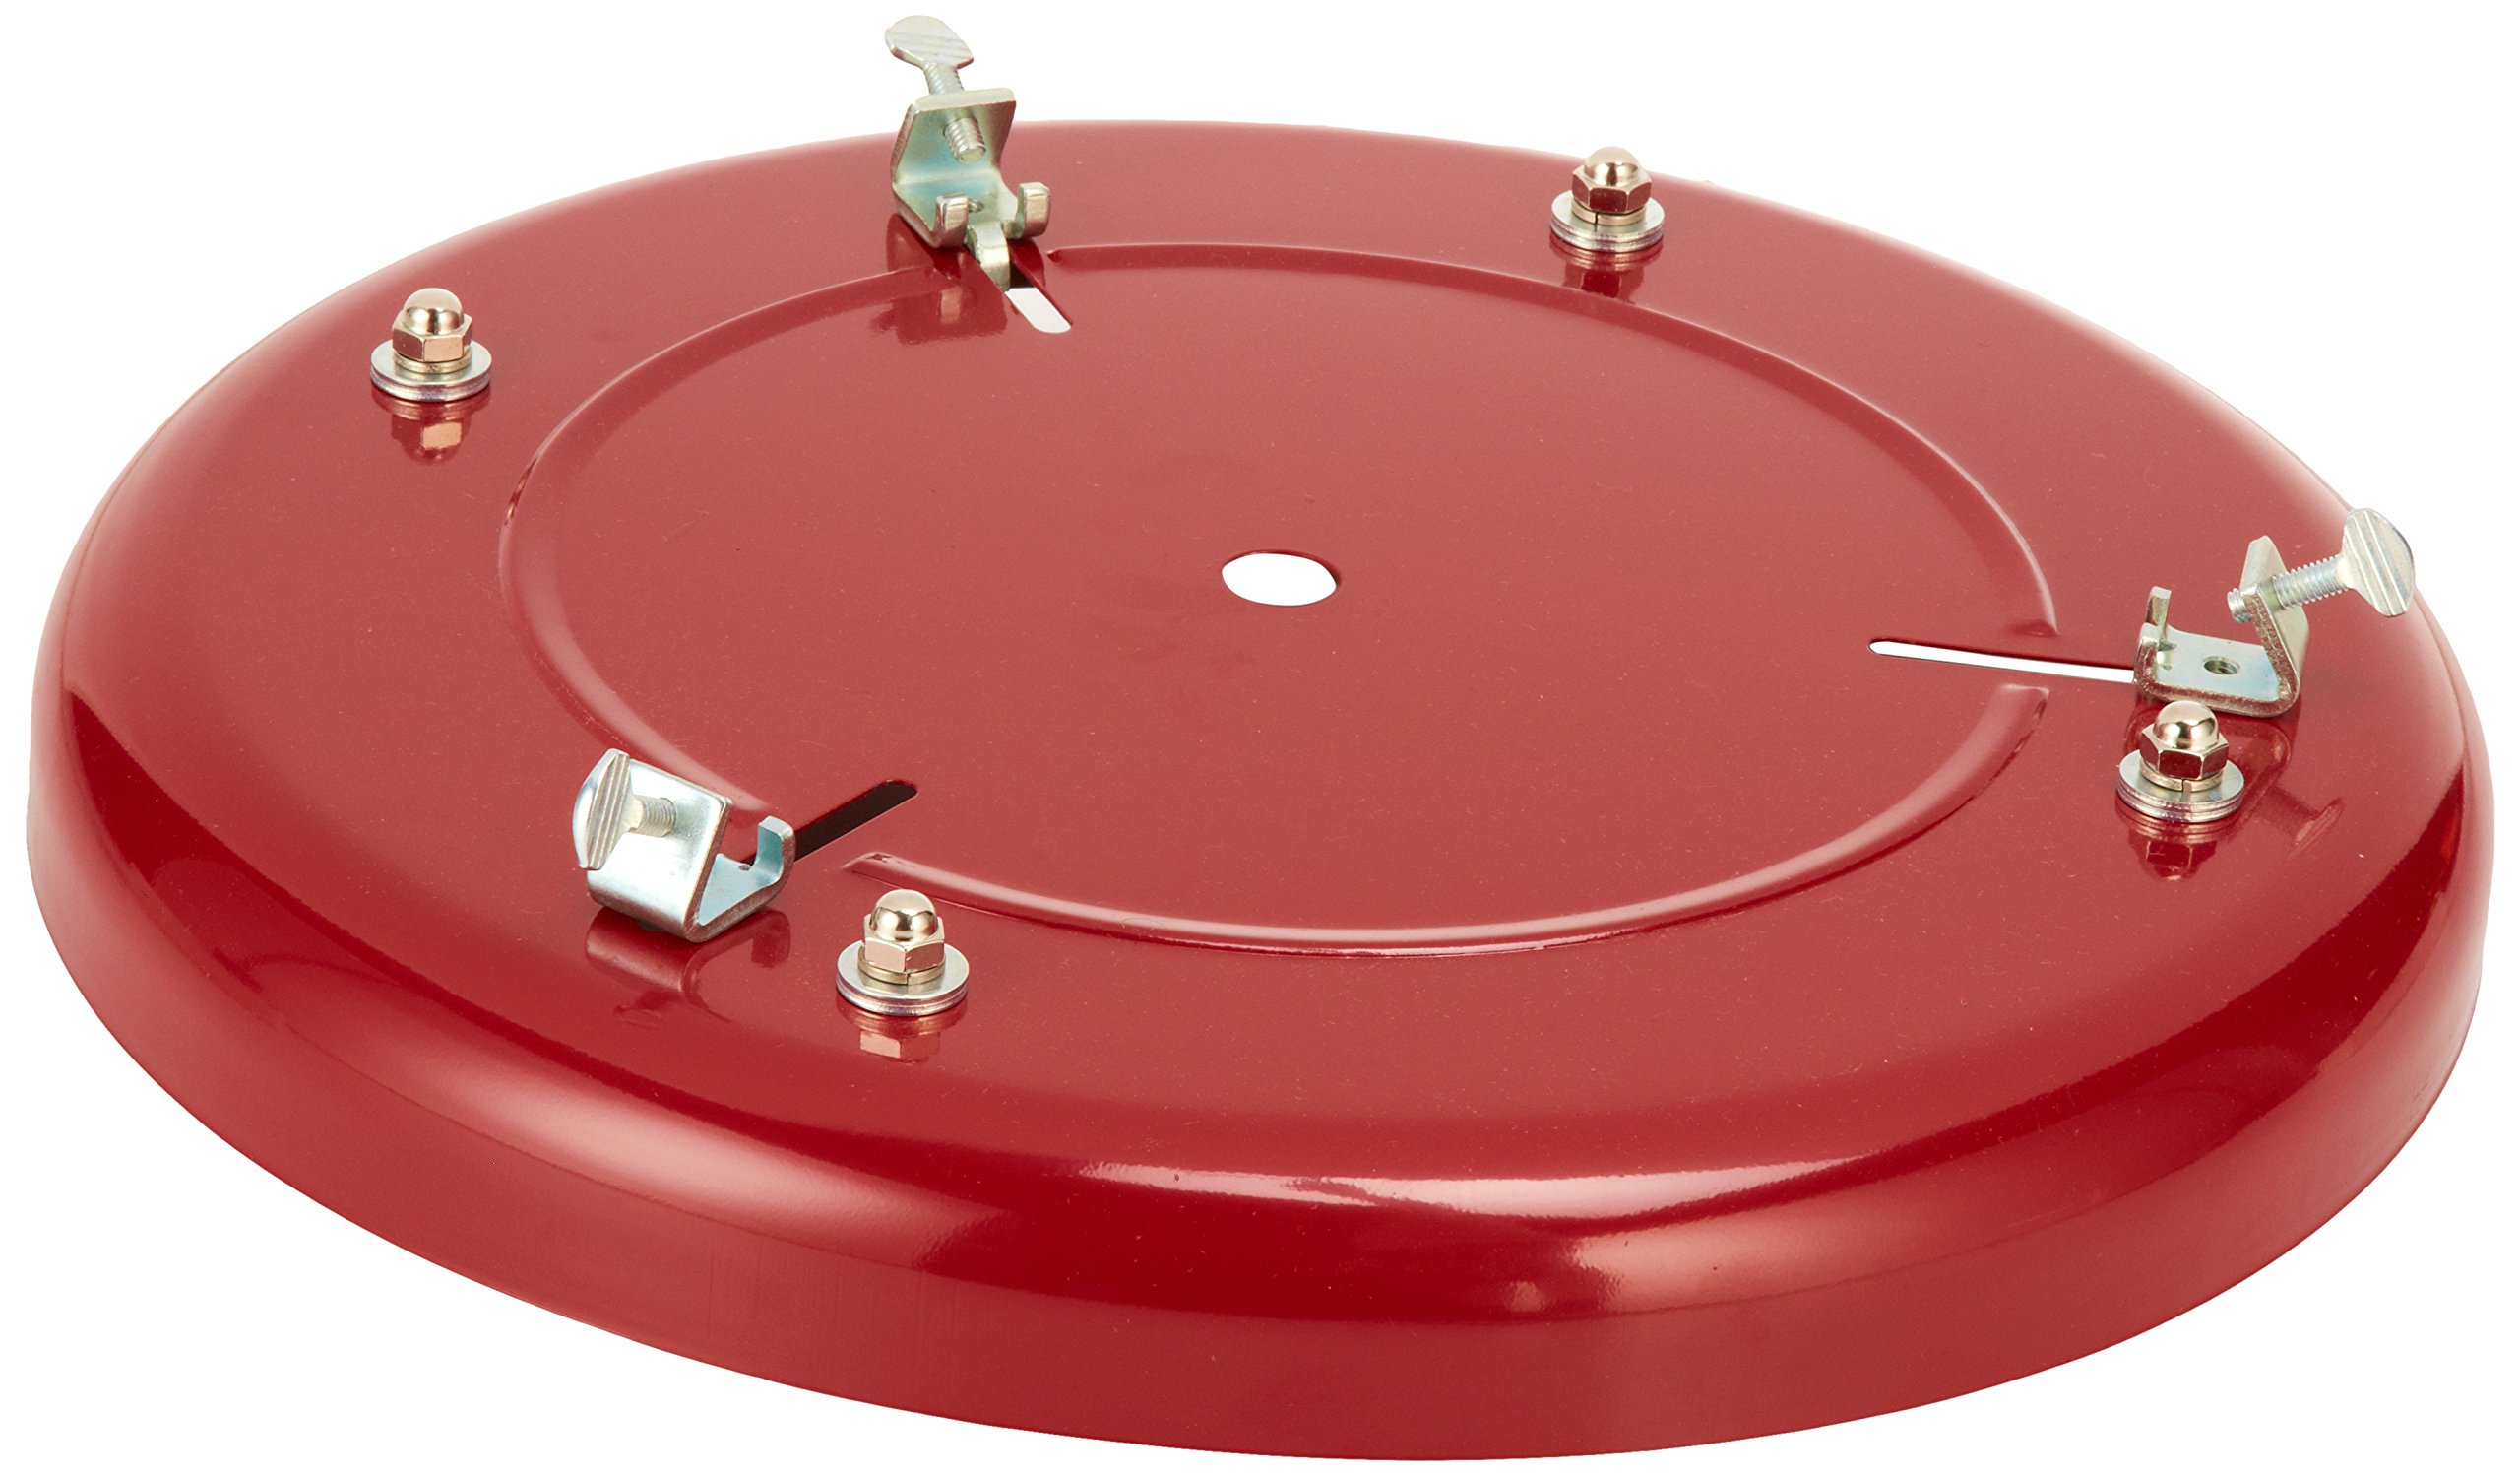 Dolly for 16 Gallon/120 Lb Drum Image